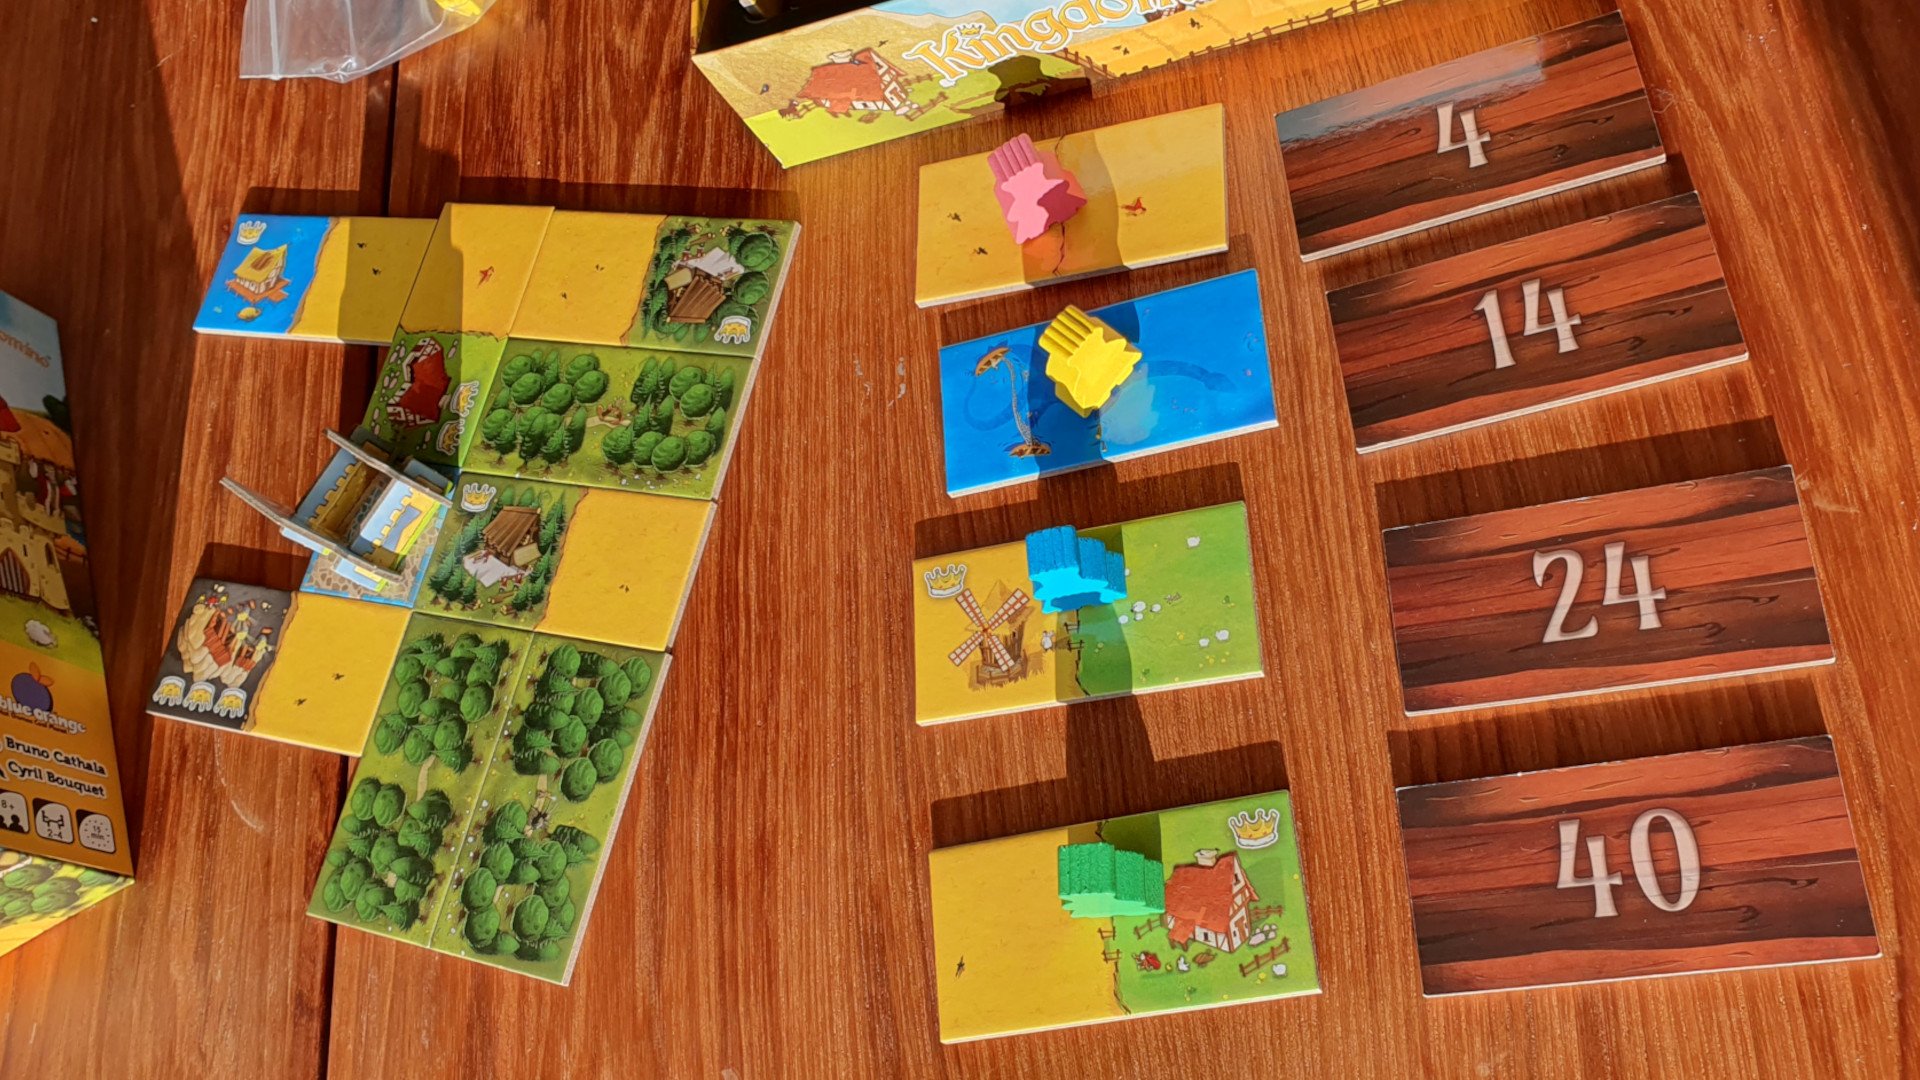 Kingdomino review - example of gameplay, to one side a partially complete kingdom has been built from landscape domino tiles around a castle standee, to the right four different coloured meeples have been placed onto landscape domino tiles to claim them